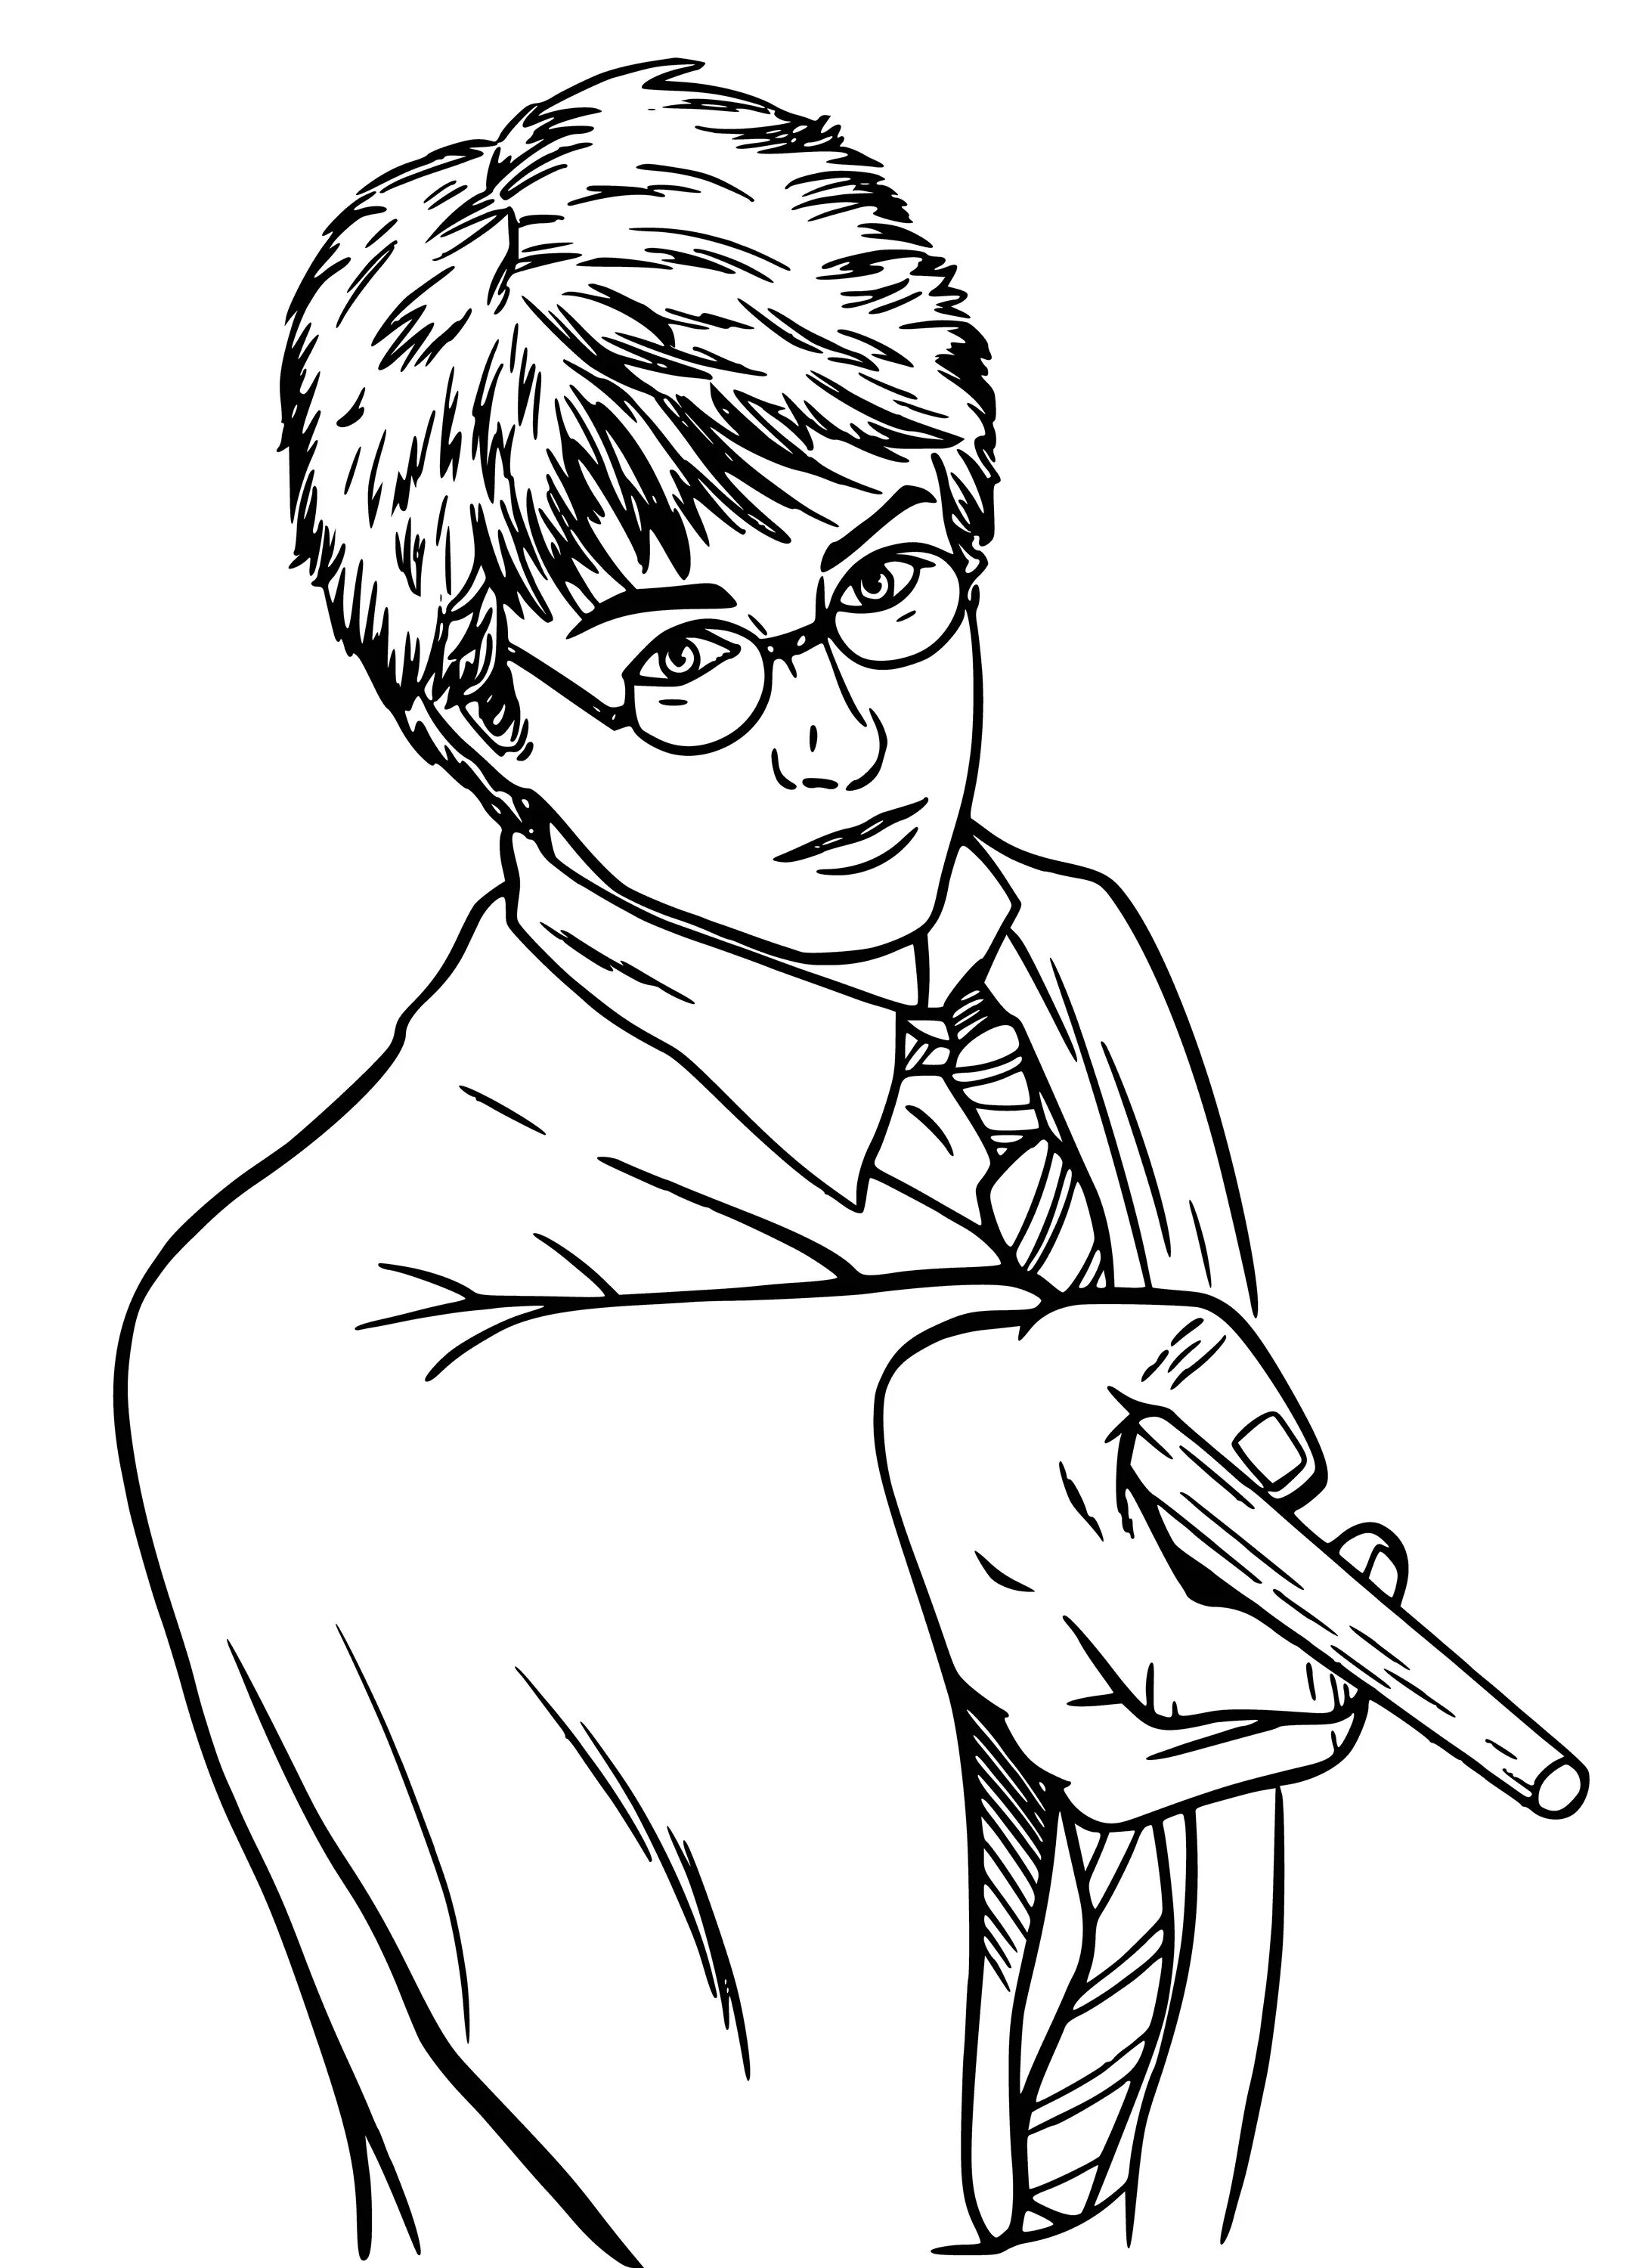 Harry potter drawing #10